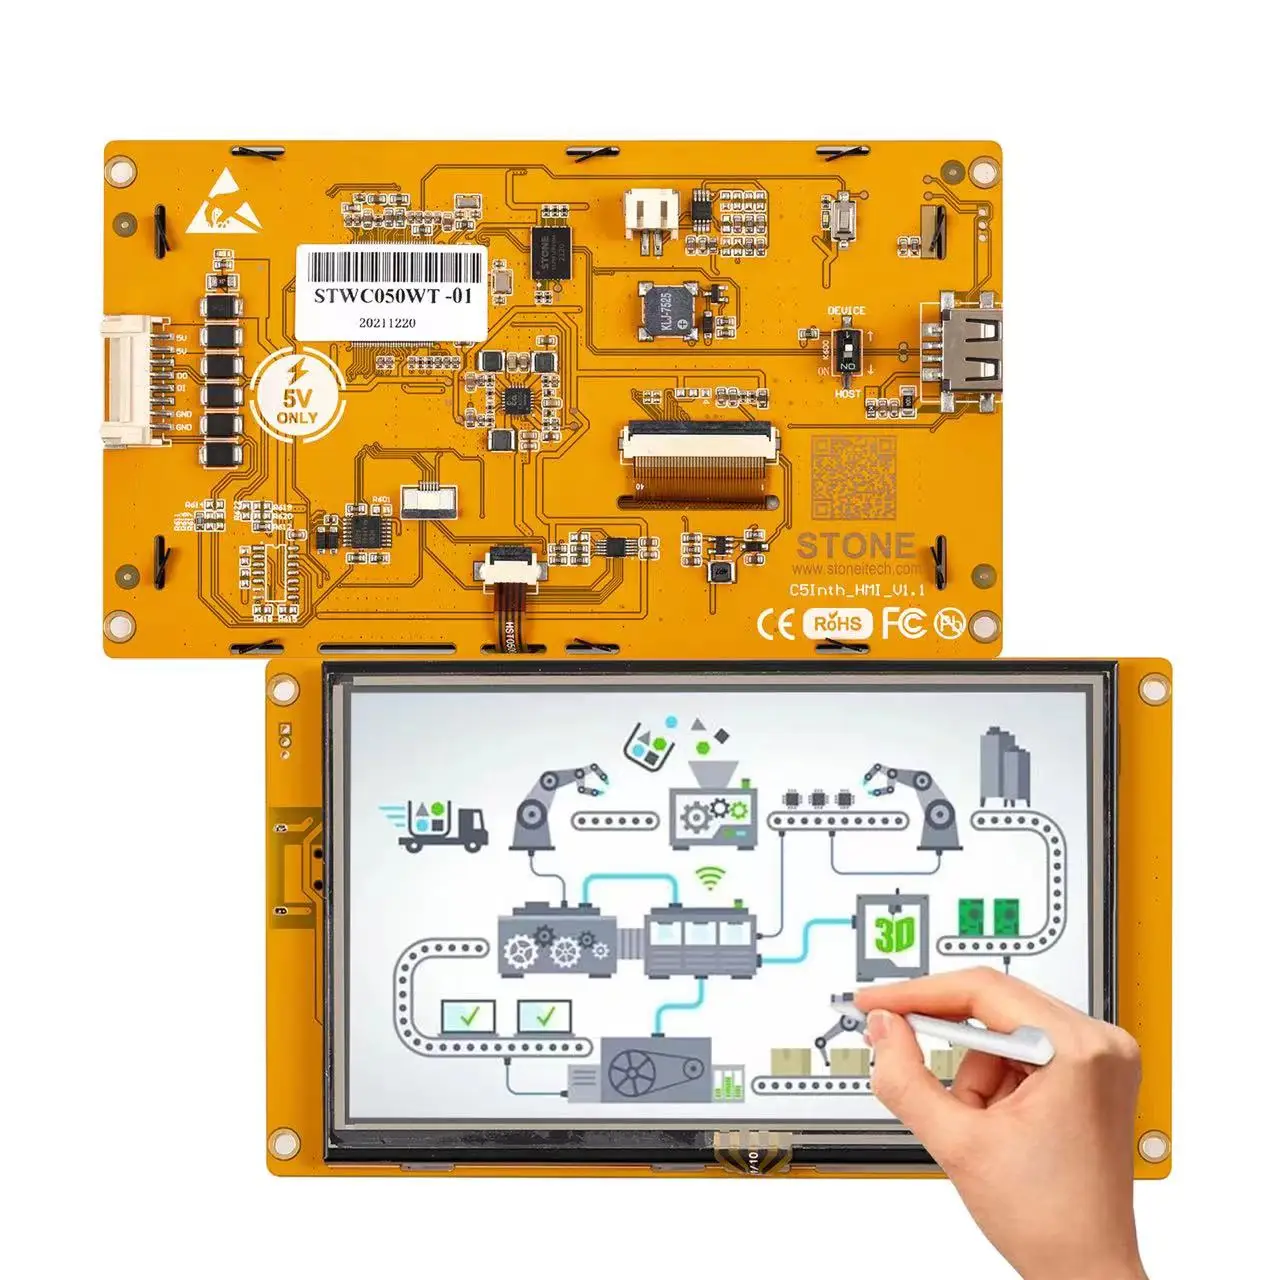 5 Inch TFT LCD Module Intelligent Civil Type Panel Smart Touch Screen Display with RS232+TTL interface